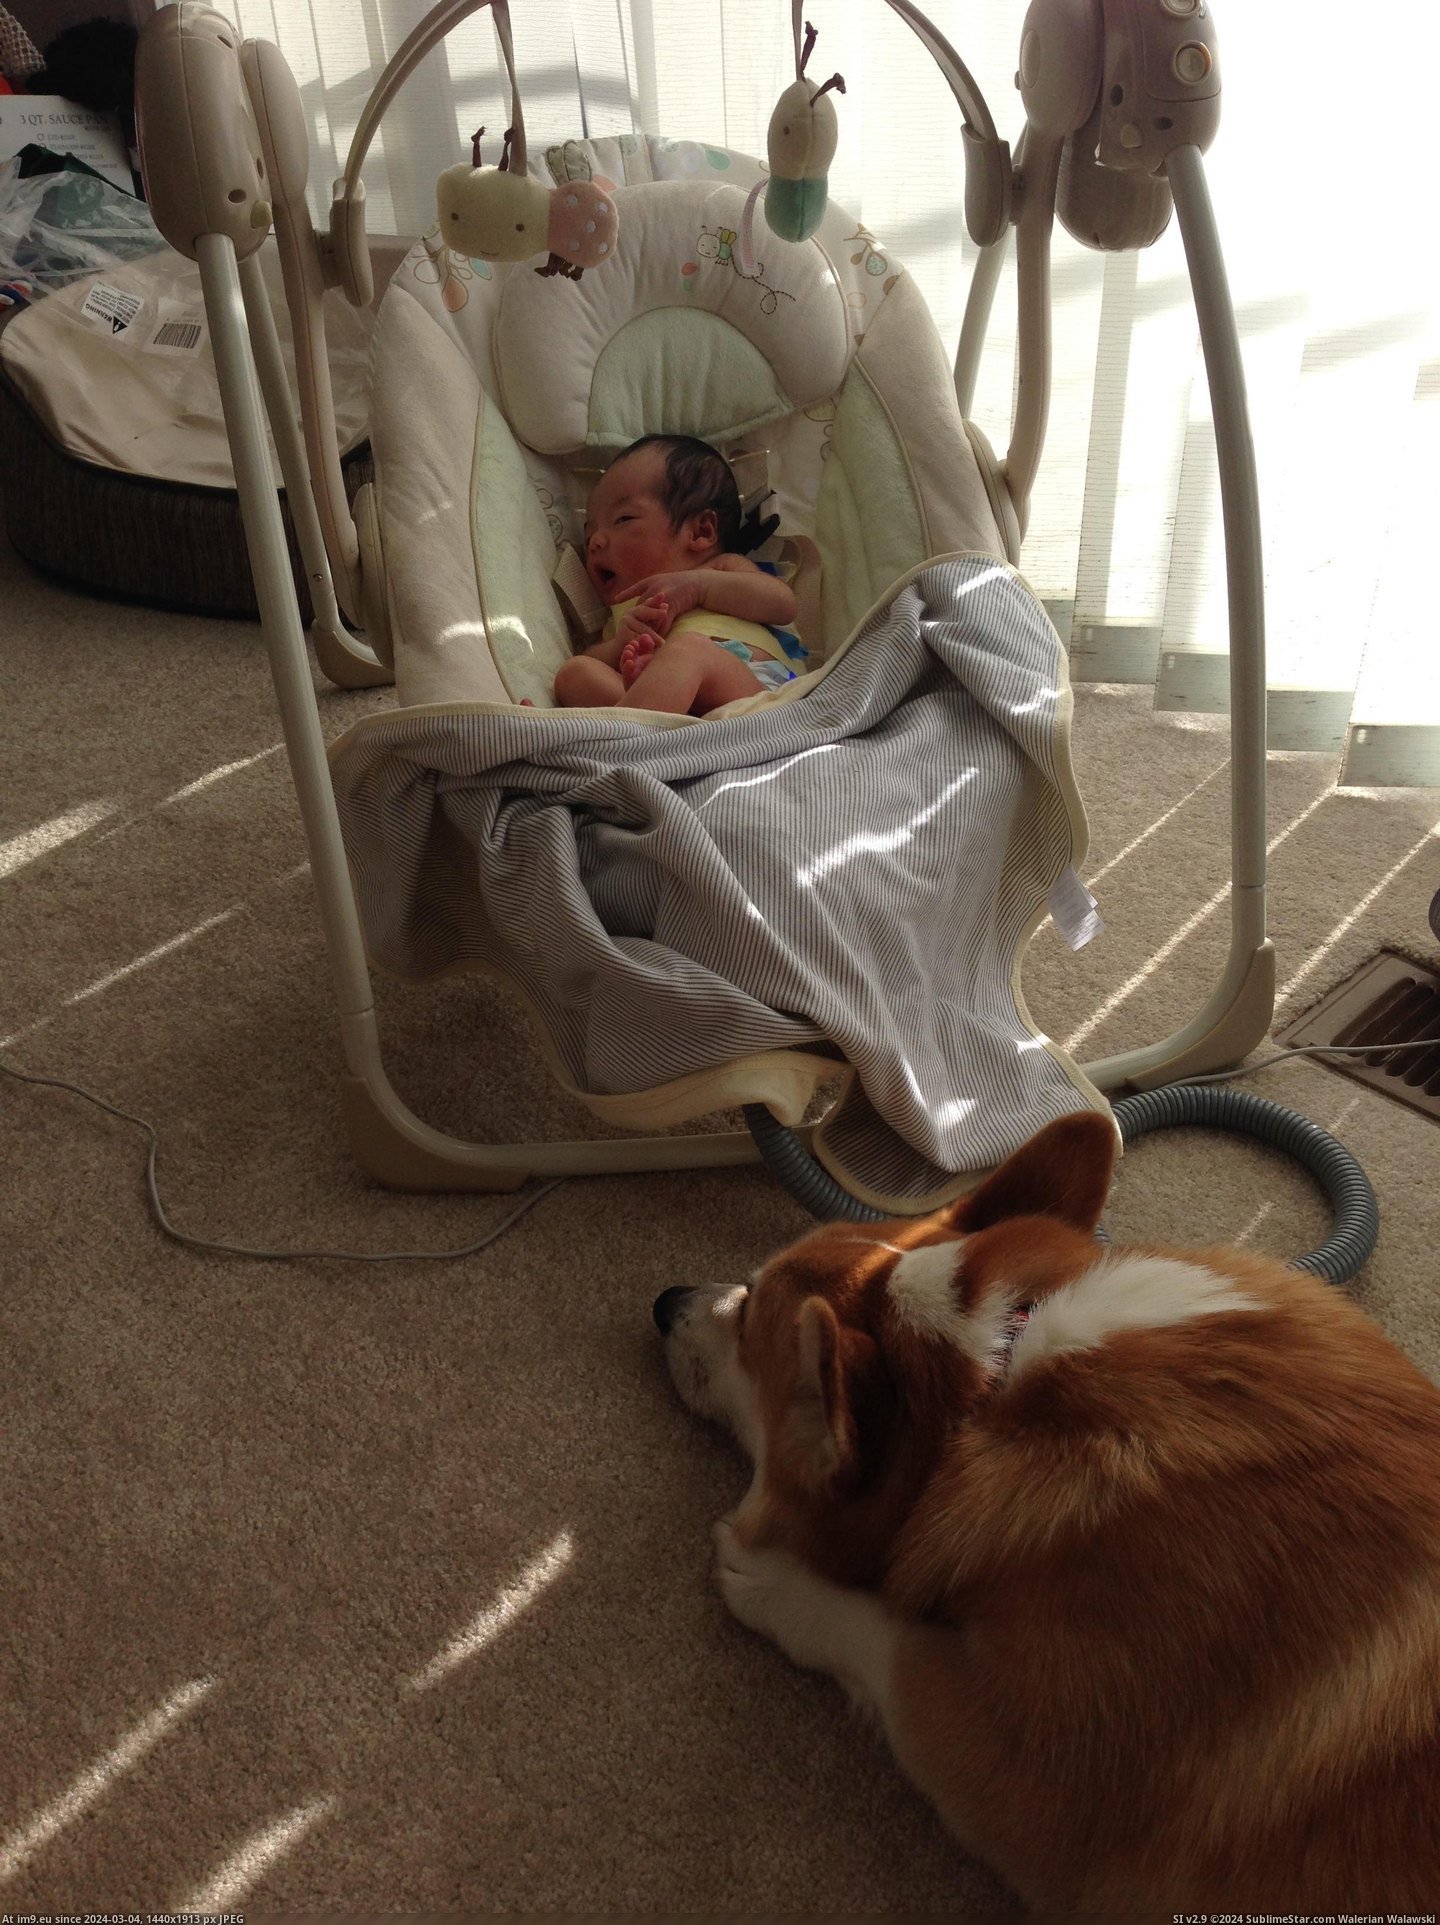 #Was #New #Ago #But #How #Daughter #Weeks #Born [Aww] My daughter was born three weeks ago. I worried about how my corgi would react but he's treating her like his new BFF... 6 Pic. (Bild von album My r/AWW favs))